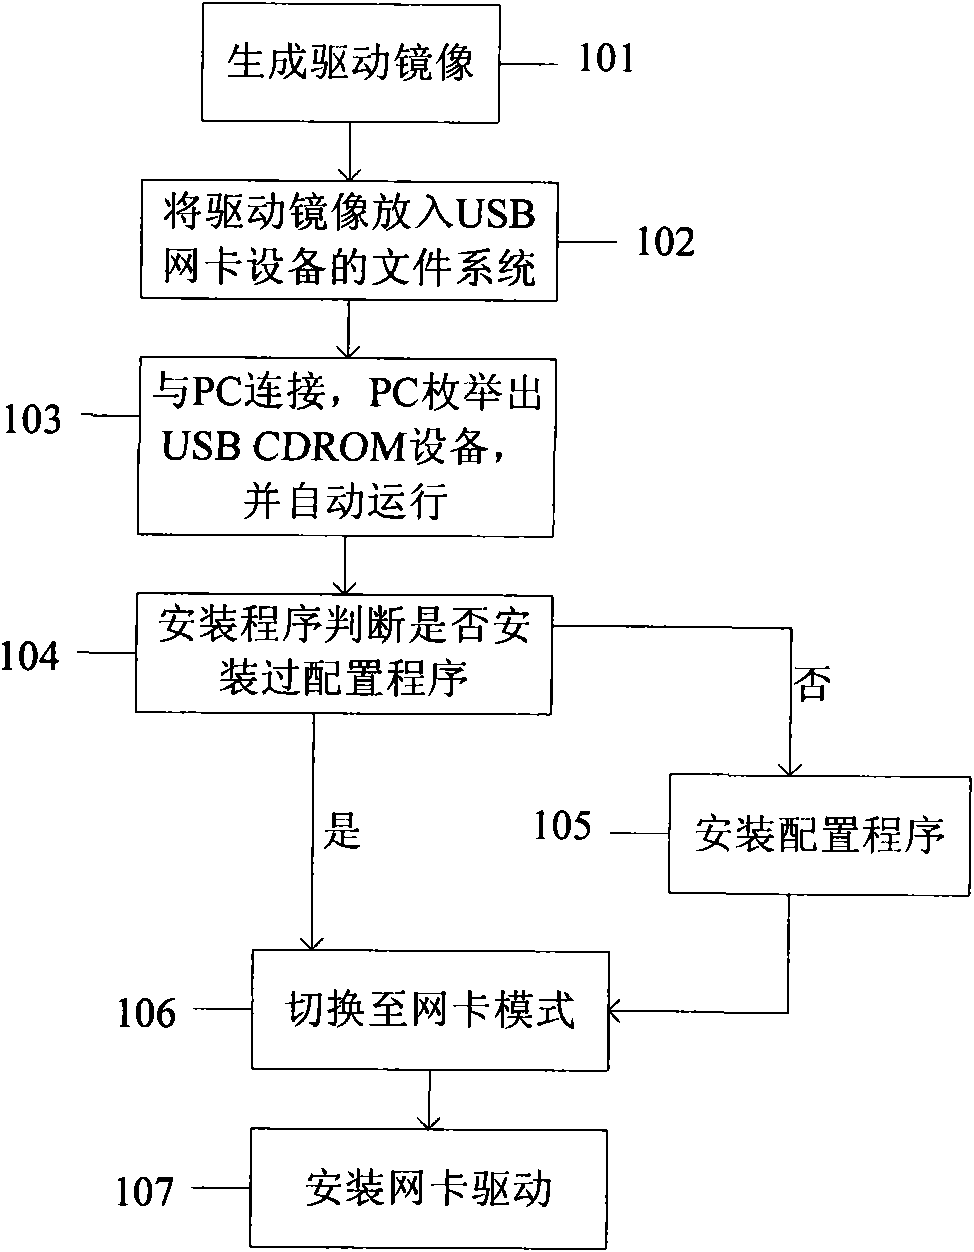 Method for automatically operating CDROM function on USB network card equipment